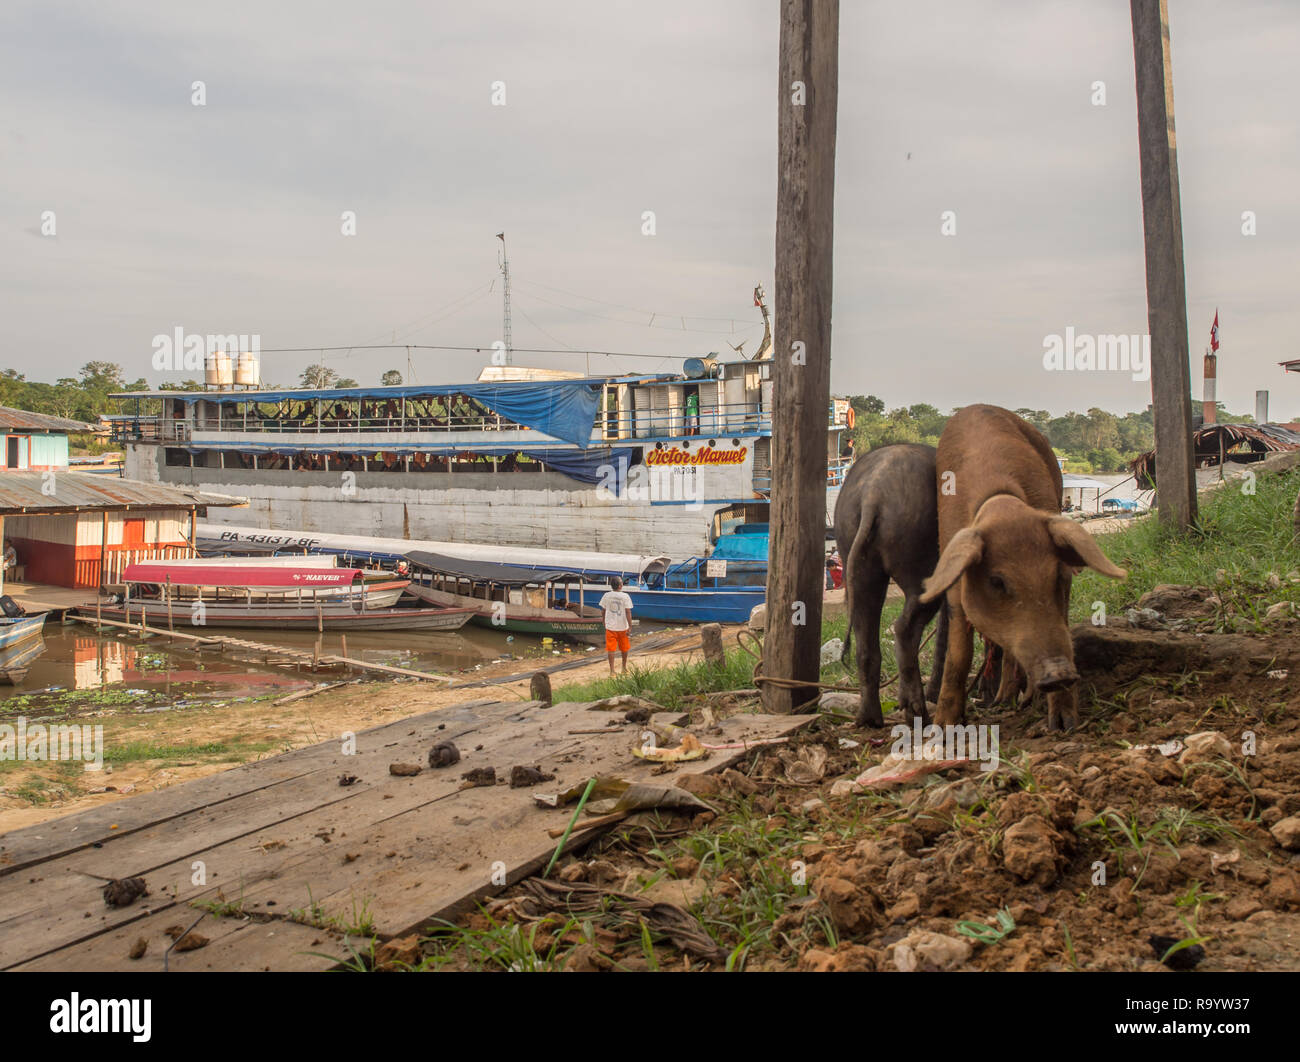 Caballococha, Peru - December 11, 2017: Pigs on the background of a cargo boat  in the port on the Amazon river Stock Photo